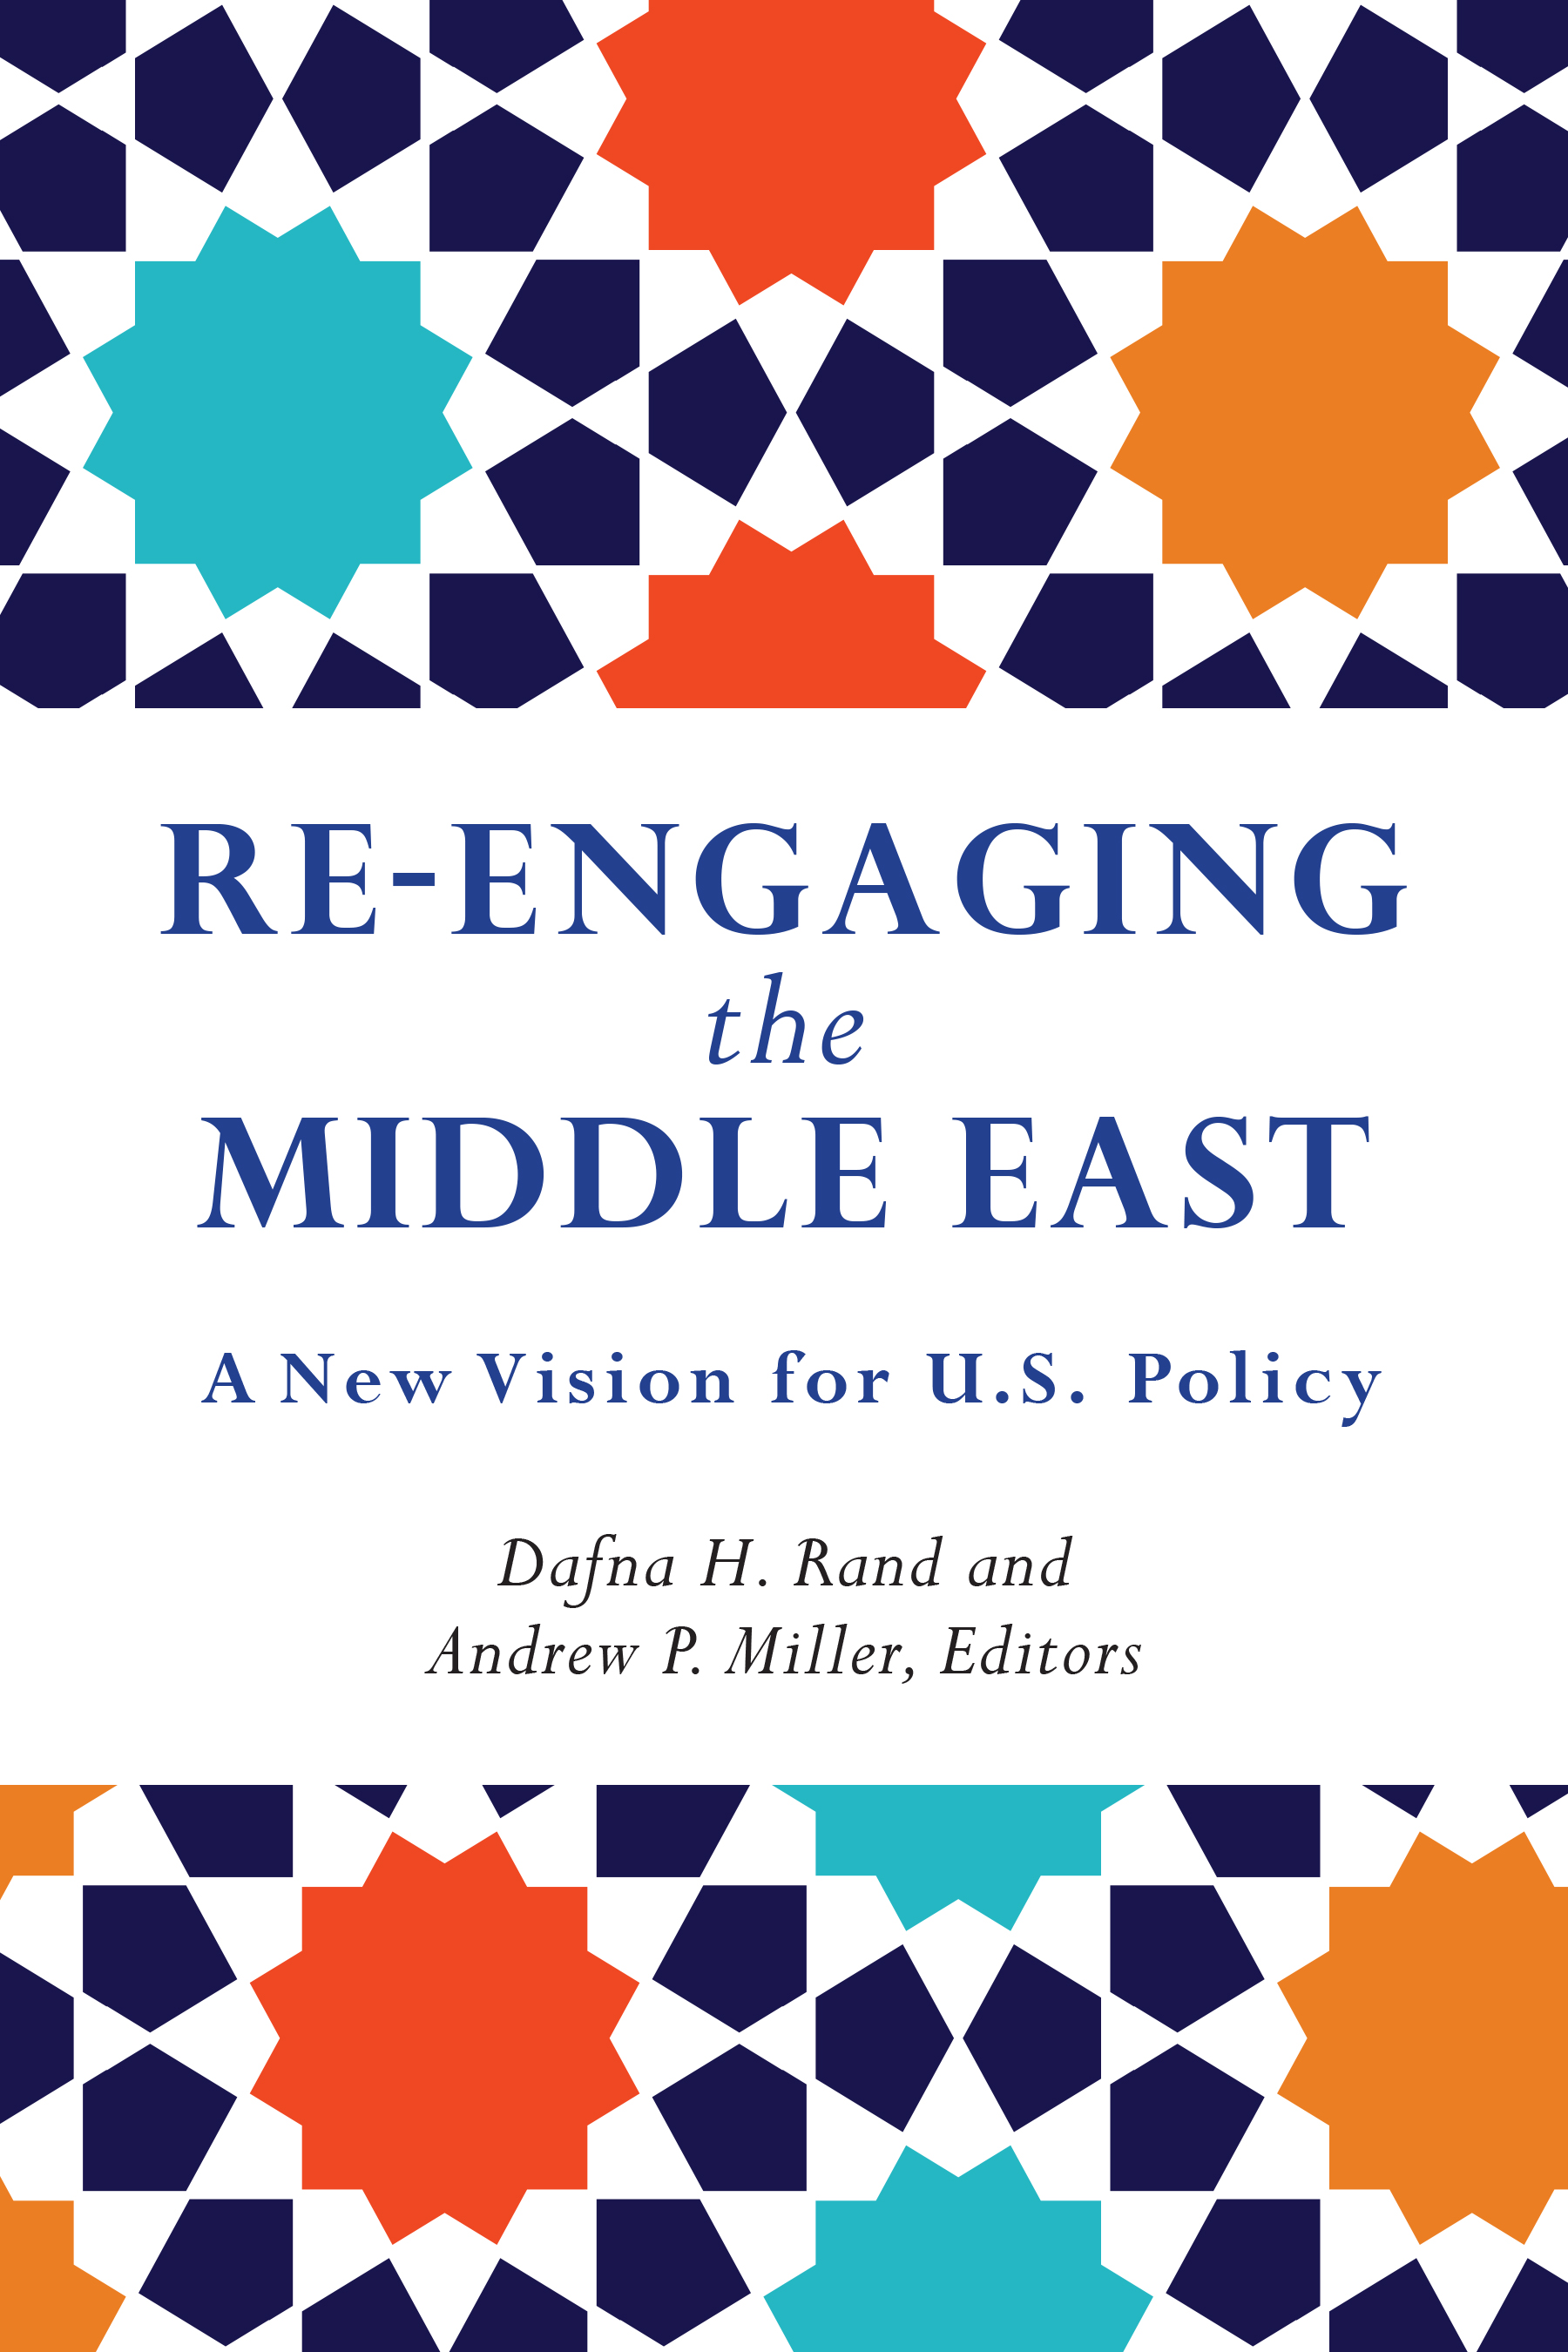 Re-Engaging the Middle East: A New Vision for U.S. Policy